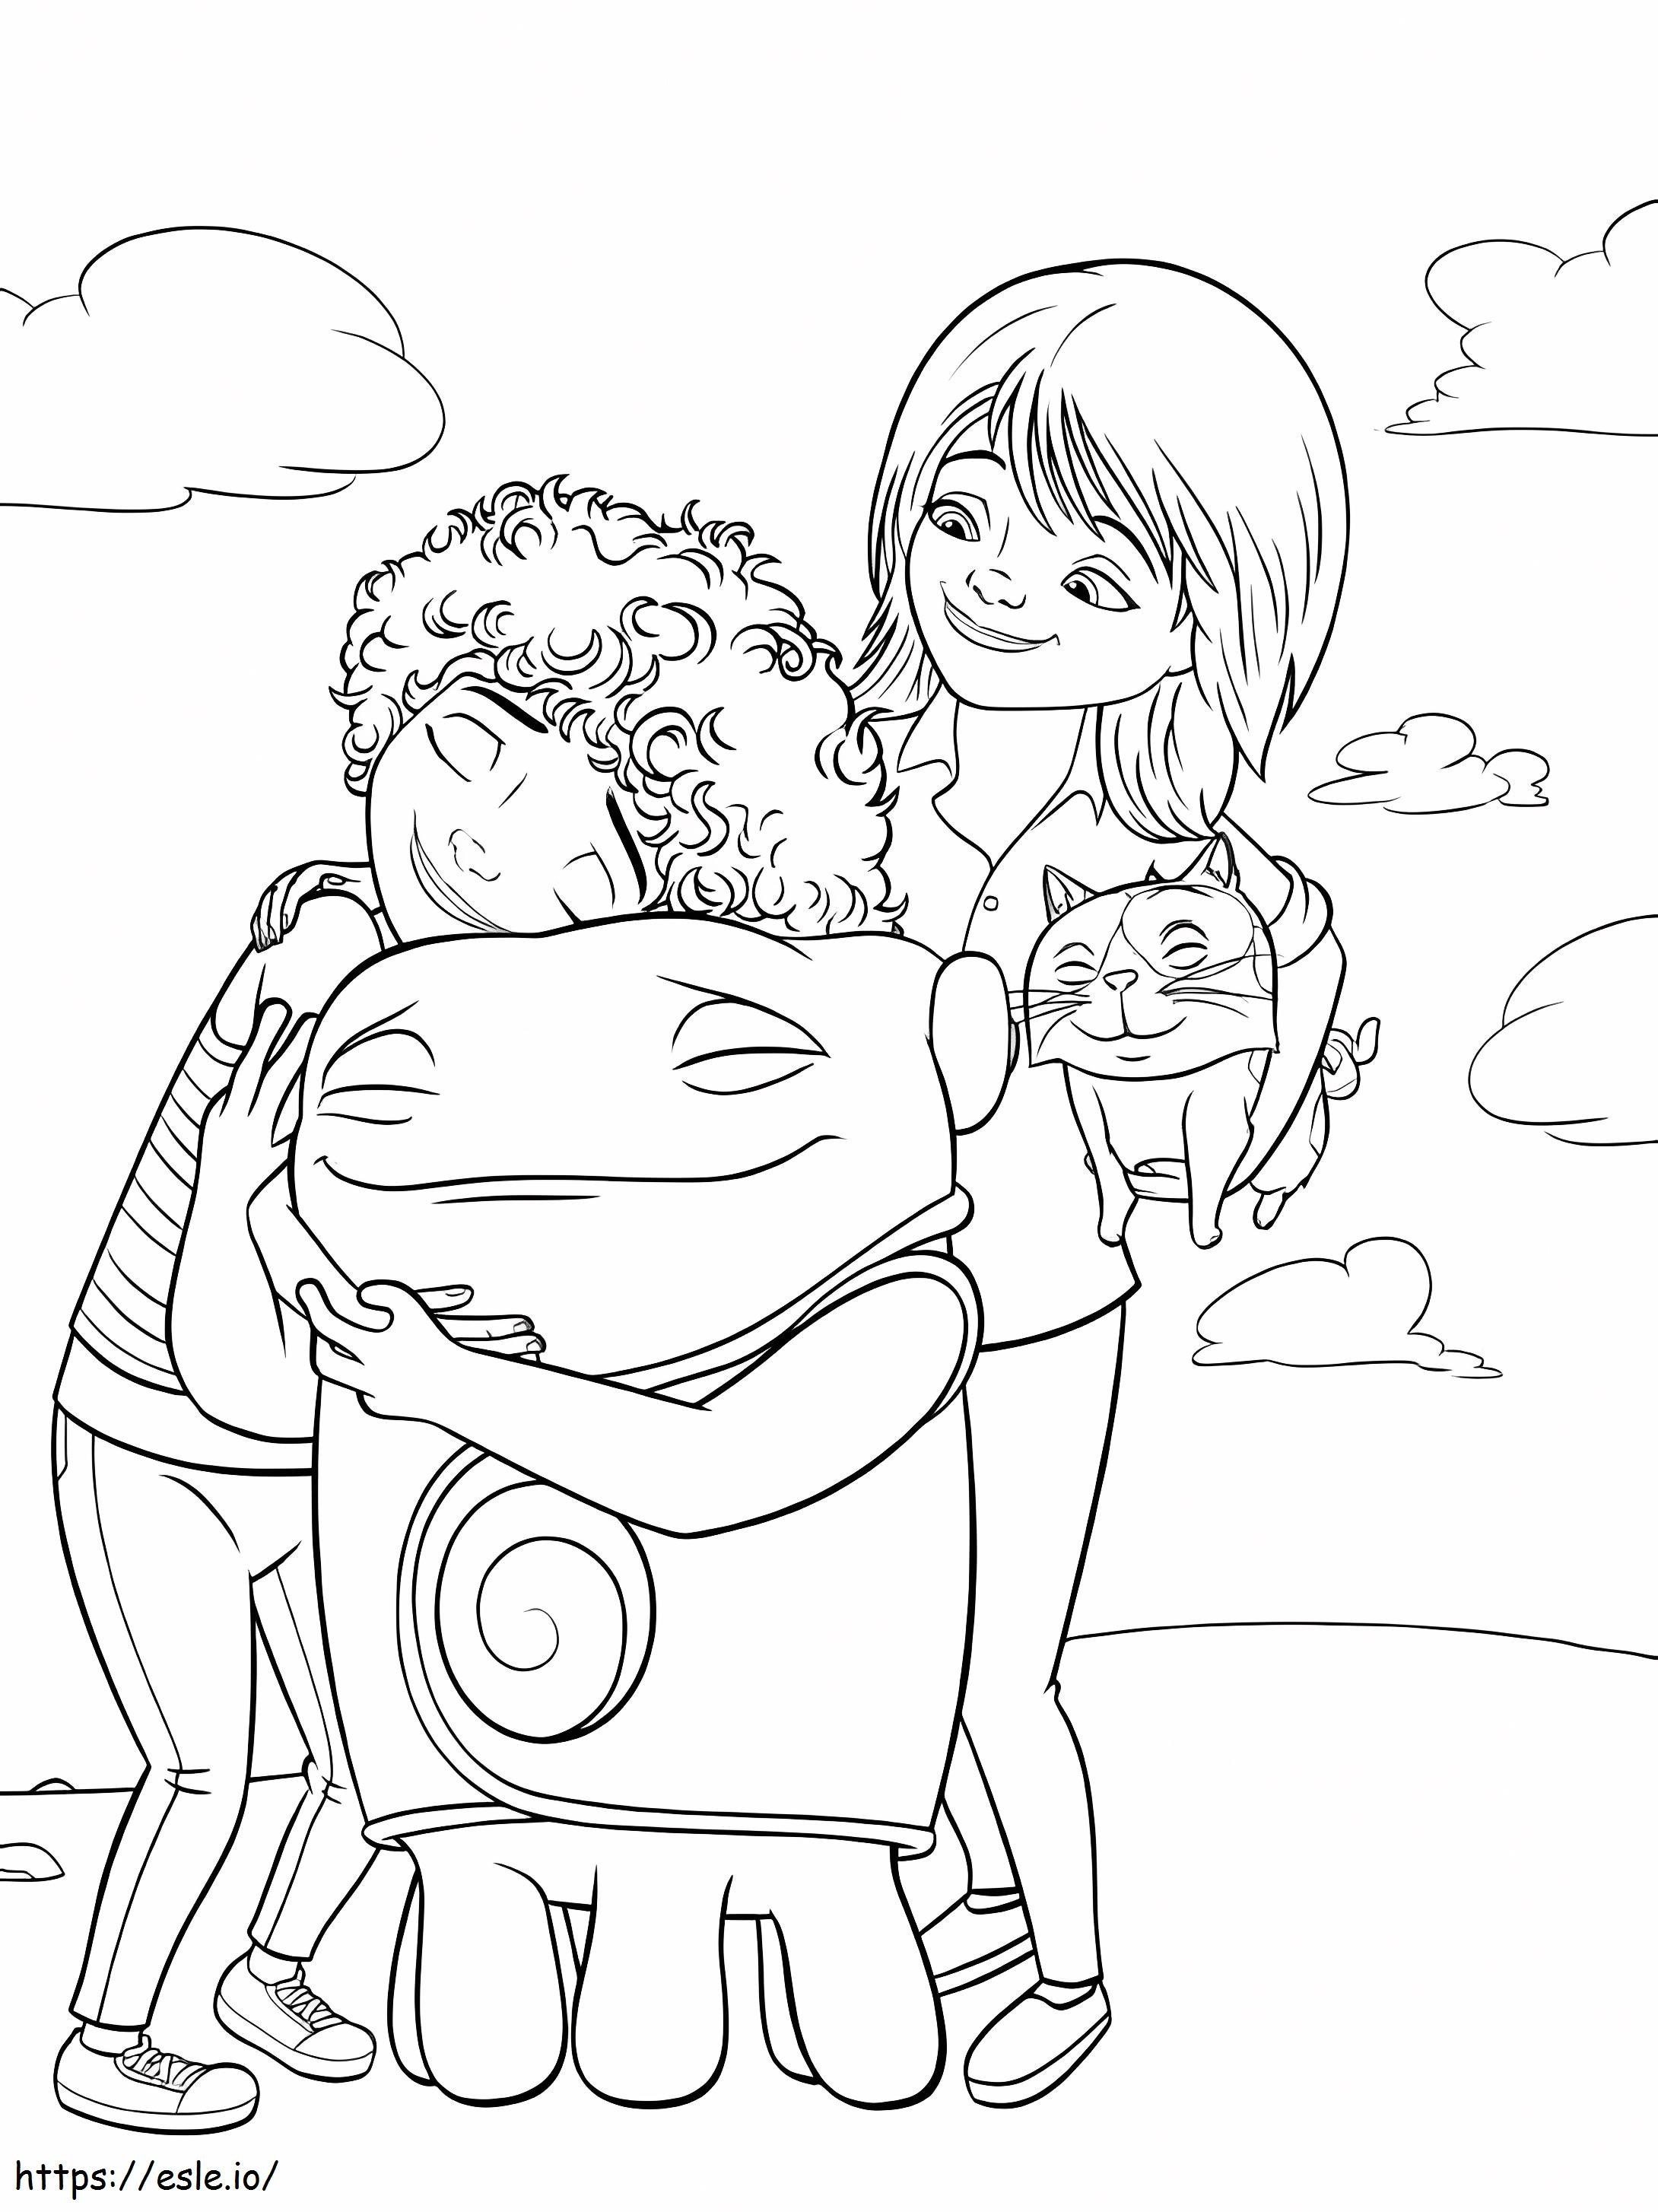 Home Cartoon Characters coloring page